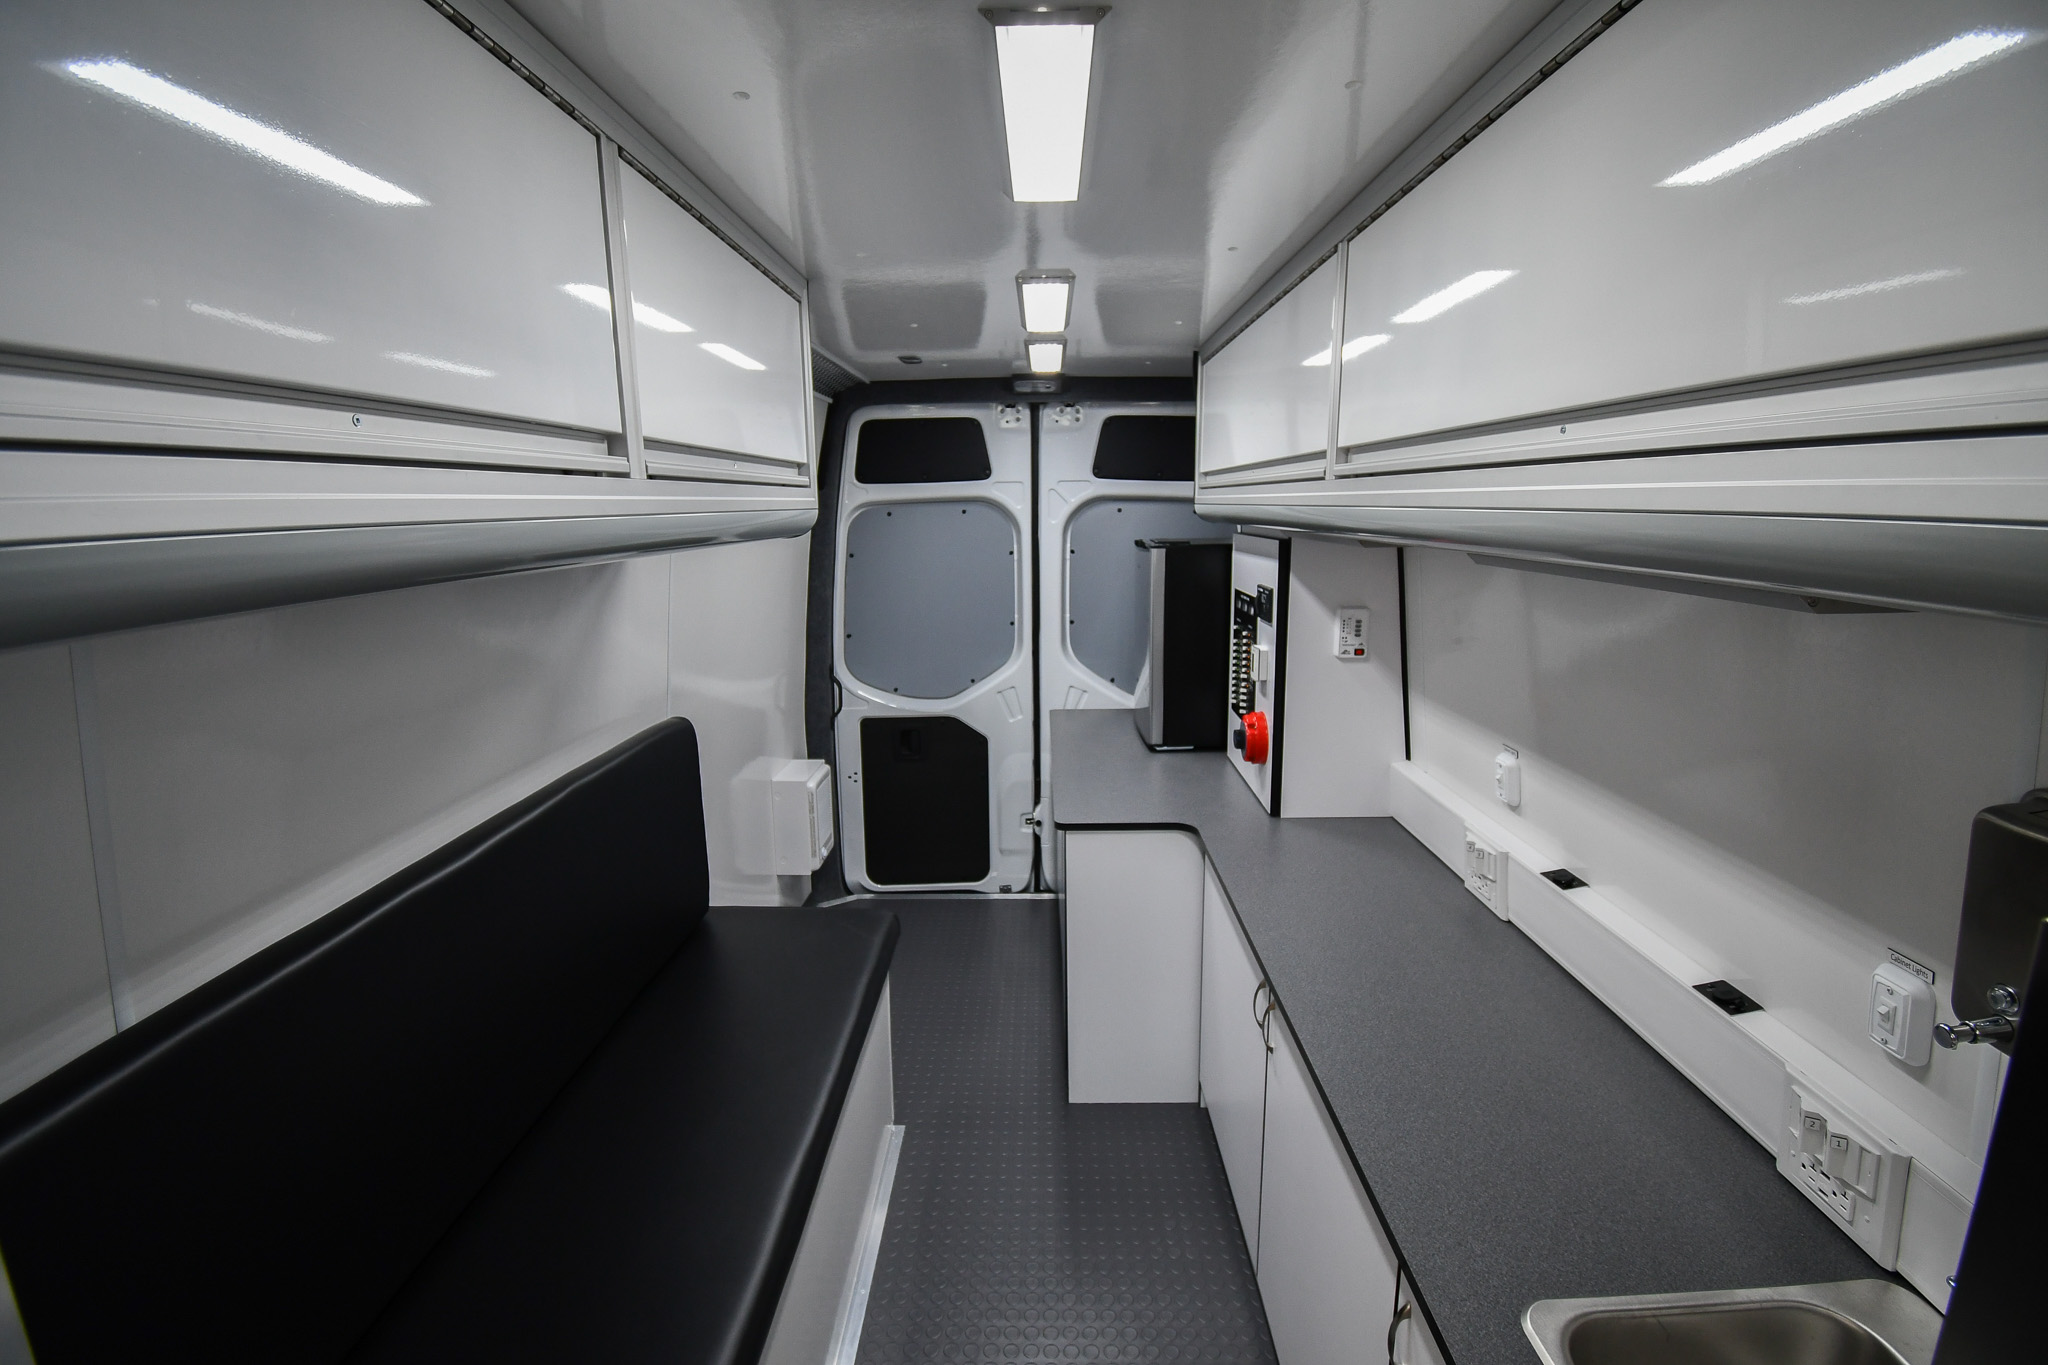 A front-to-back view inside the unit for Omaha, NE.